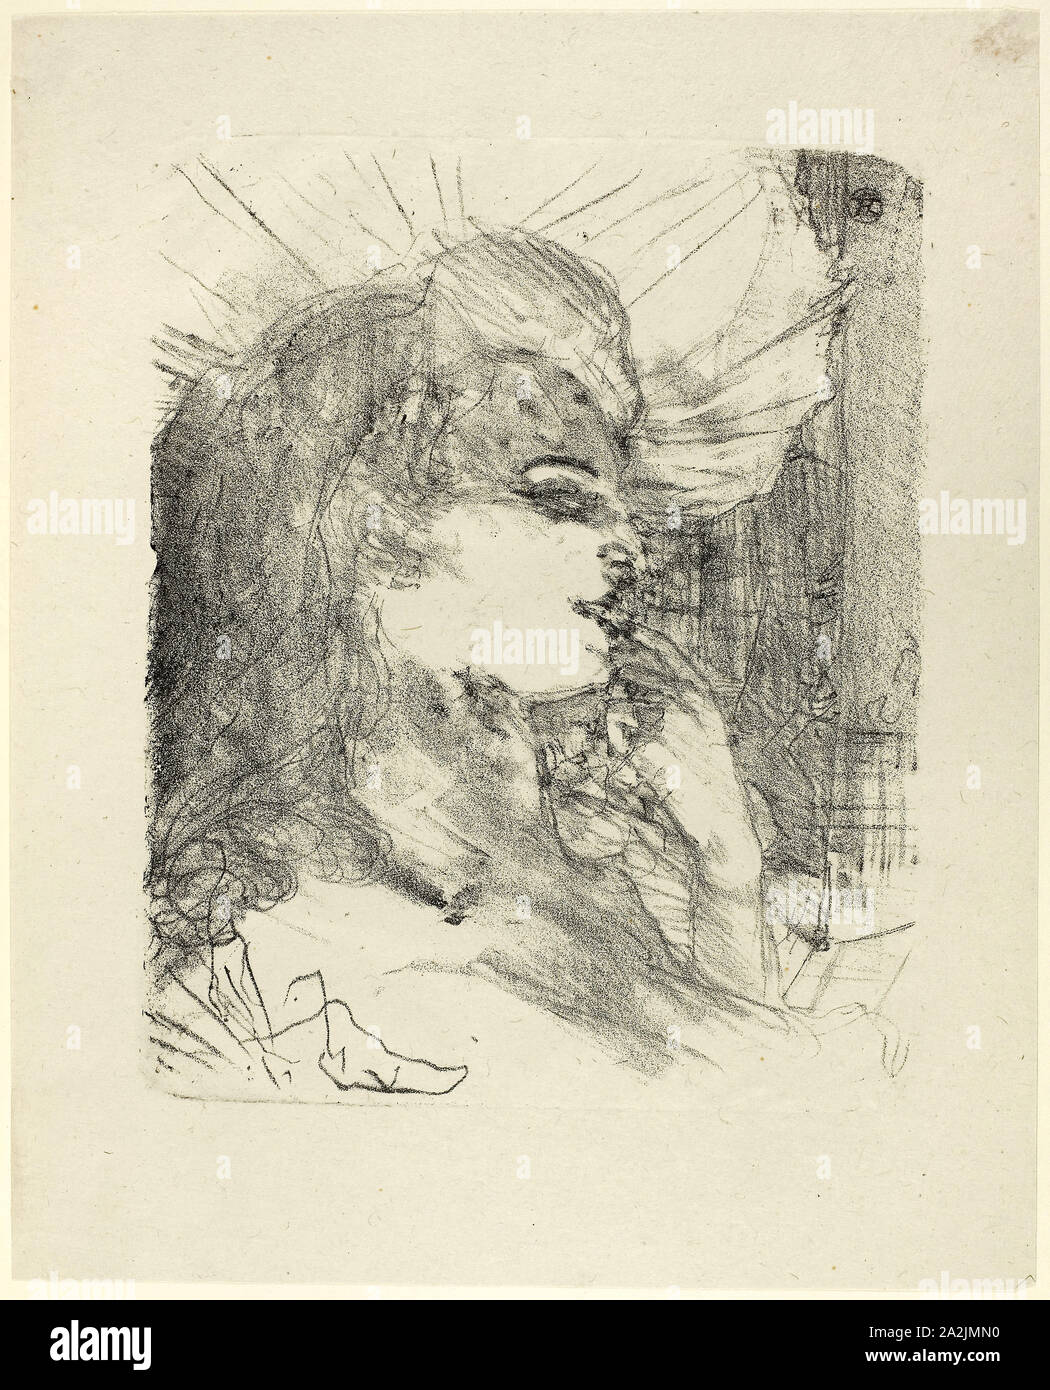 Anna Held, from Treize Lithographies, 1898, published before 1906, Henri de Toulouse-Lautrec, French, 1864-1901, France, Lithograph on ivory laid paper, 296 × 239 mm (image), 391 × 315 mm (sheet Stock Photo